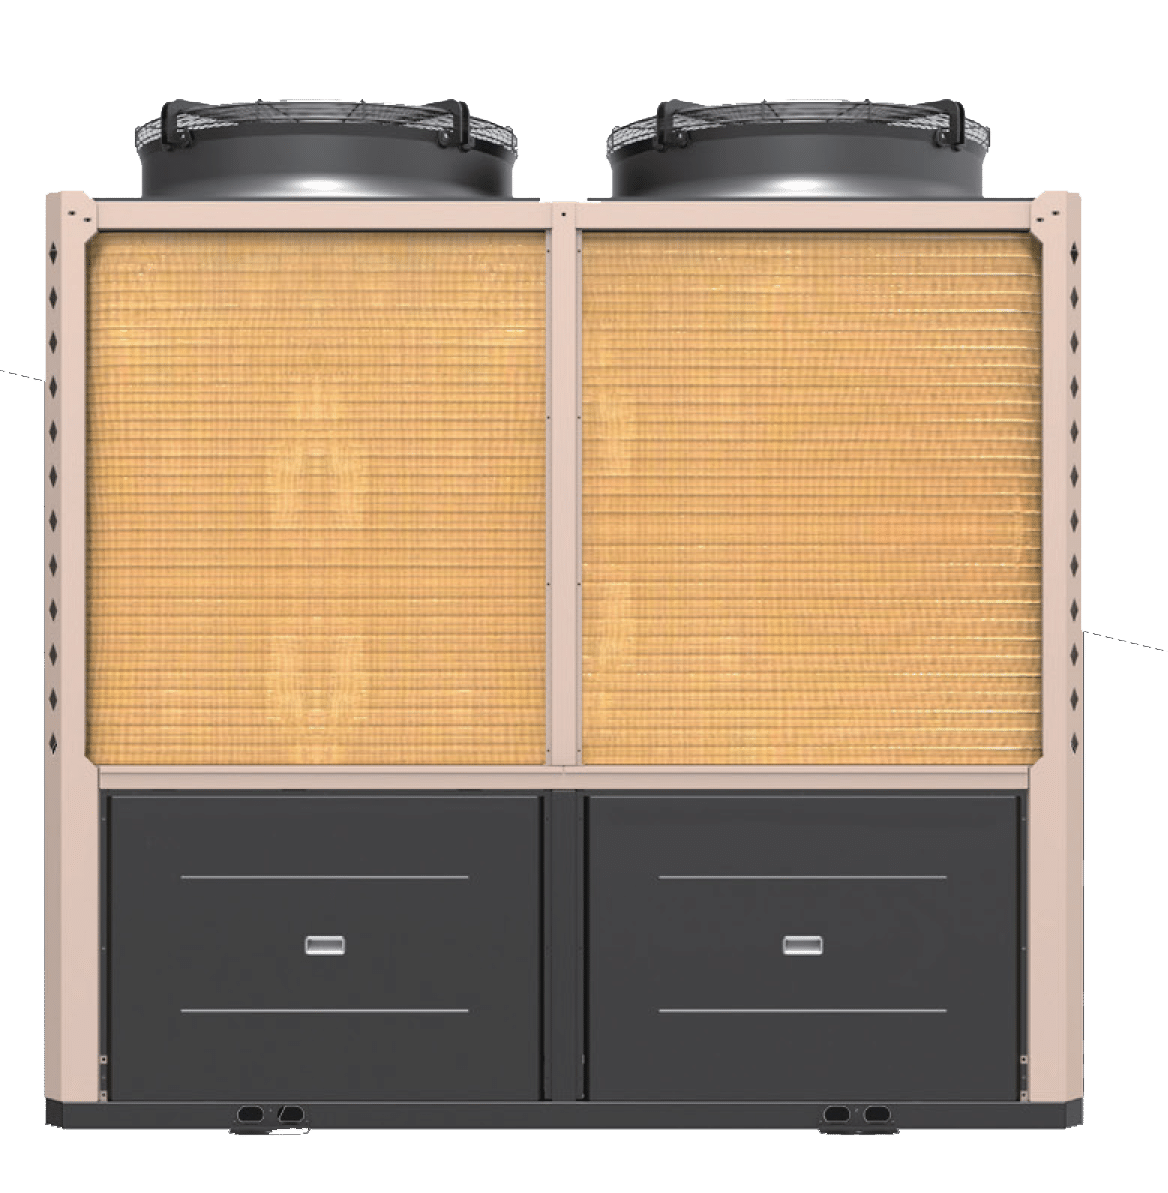 A commercial heat pump with beige filters, black storage compartments below, and metallic grey framework, viewed against a solid green background. | AES - Pool Heating & Energy Efficient Products